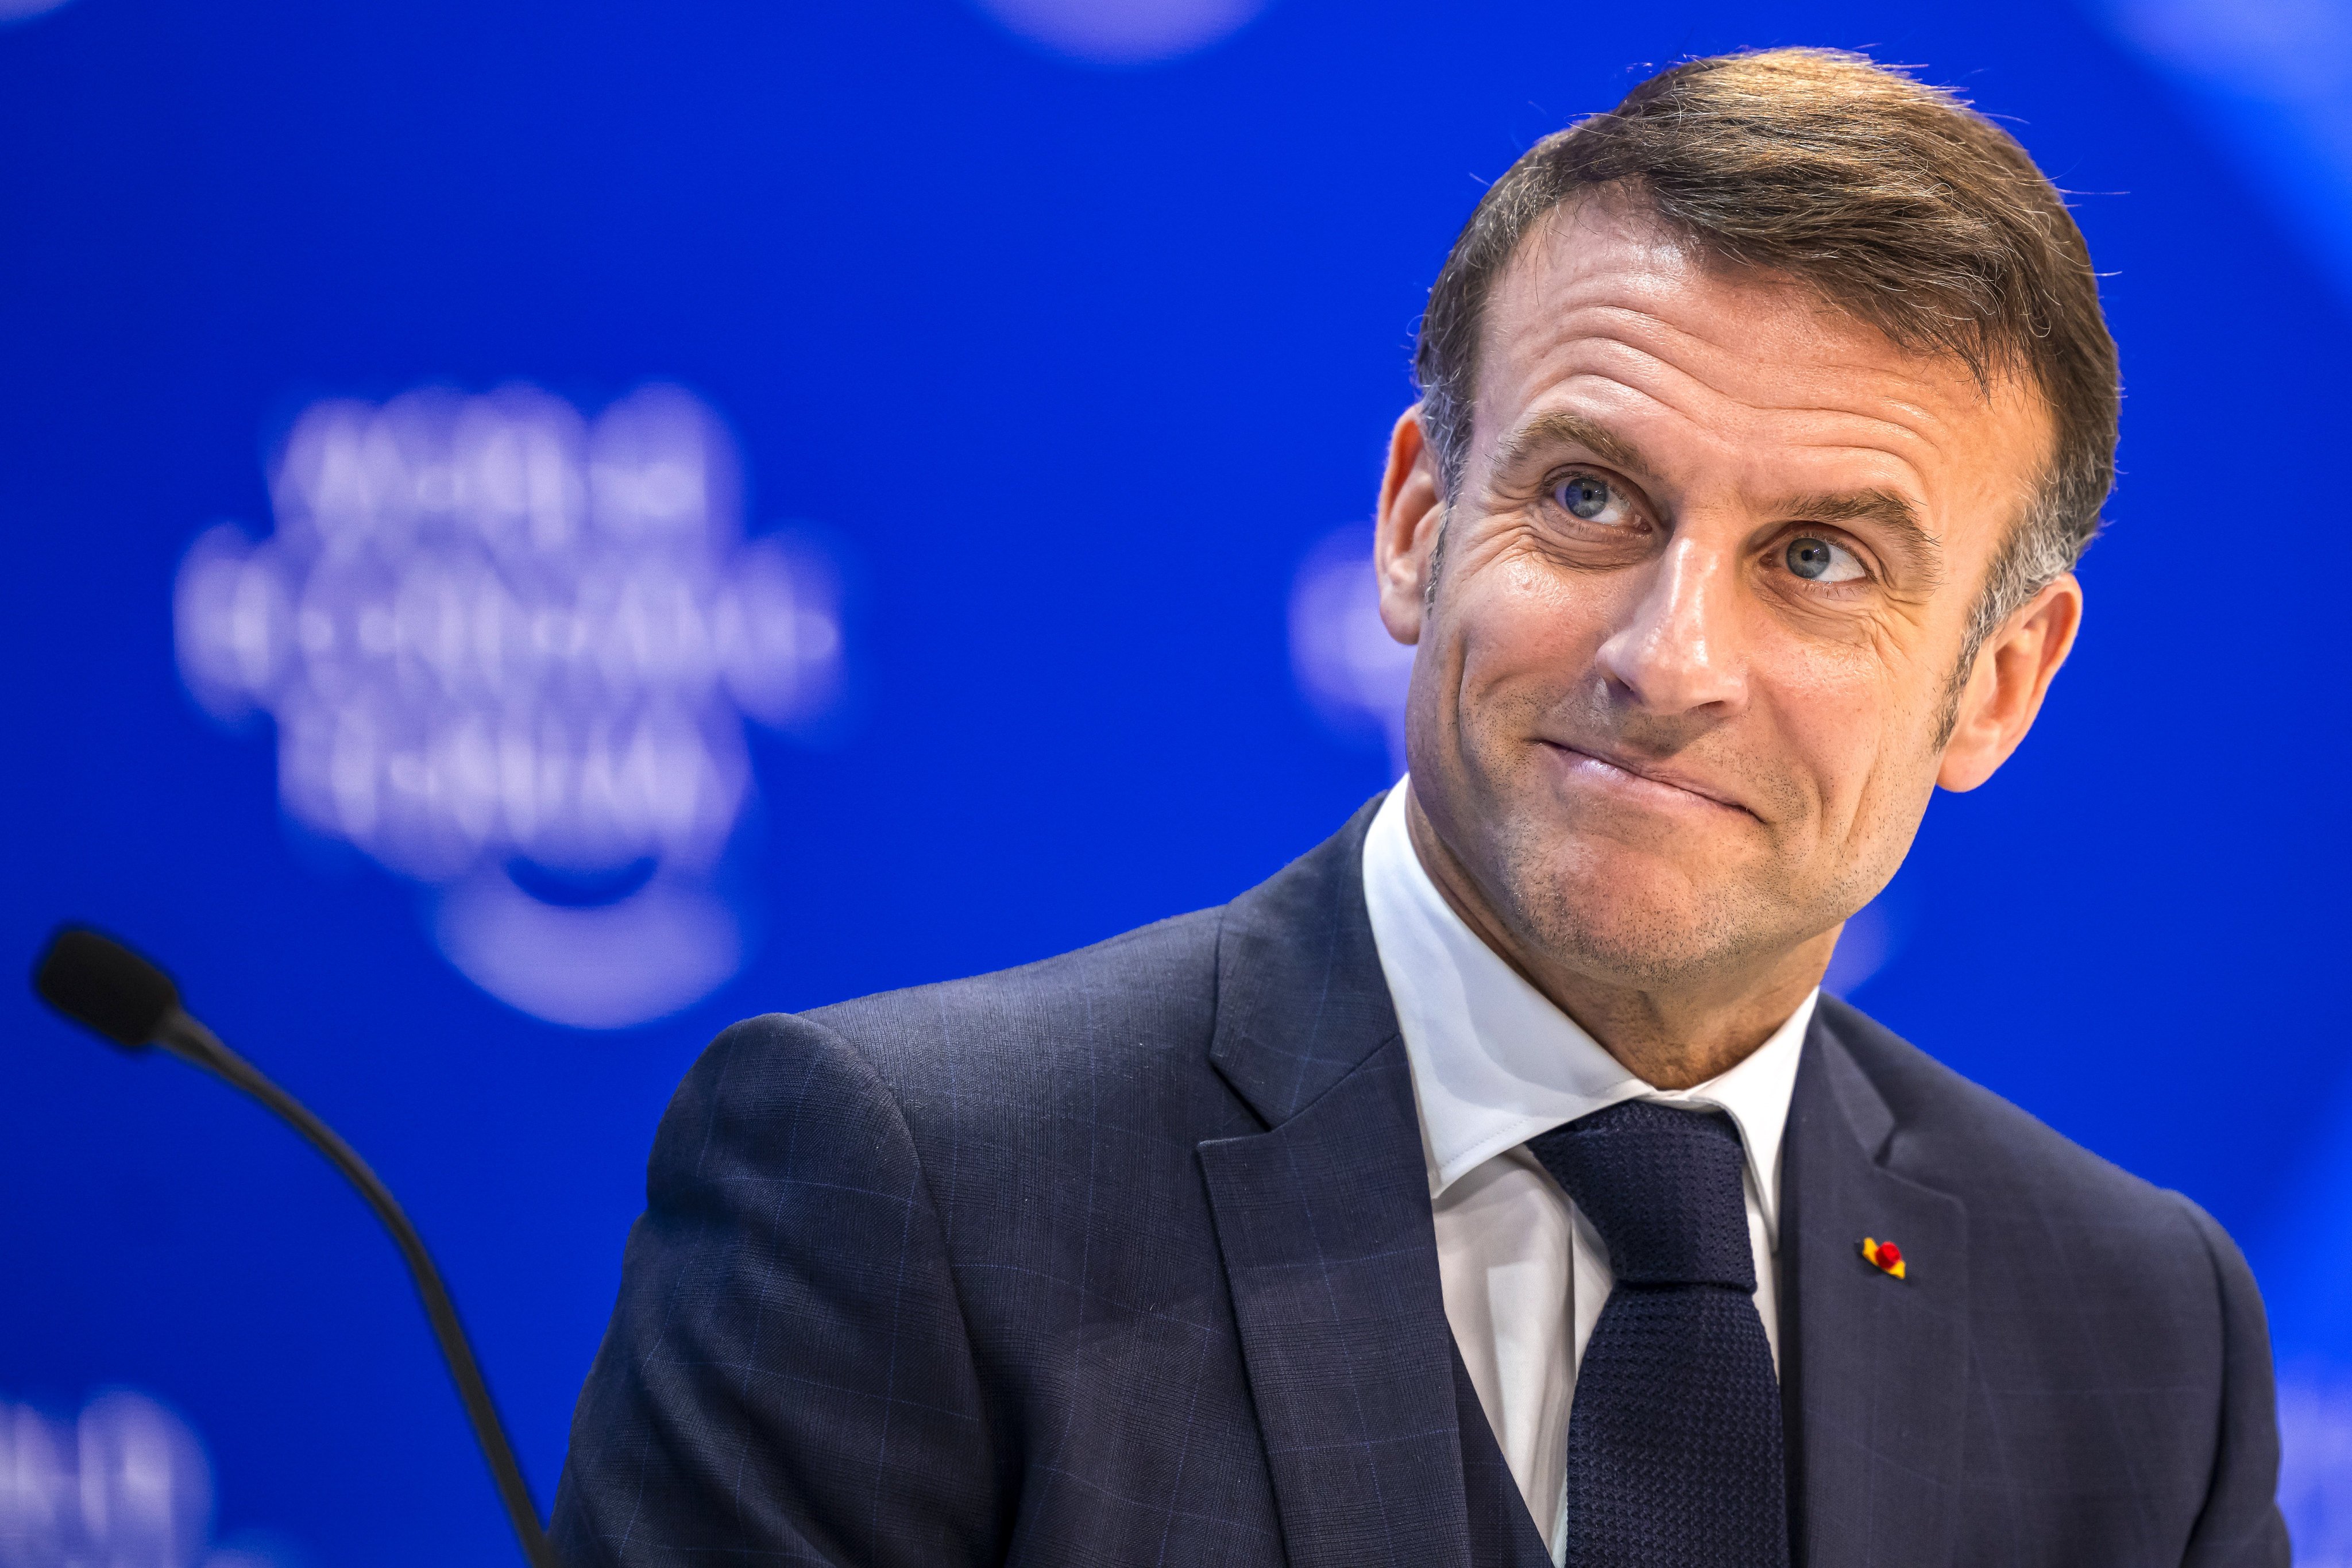 French President Emmanuel Macron has told the World Economic Forum in Davos that Europe should not be dependent on China or the US. Photo: EPA-EFE